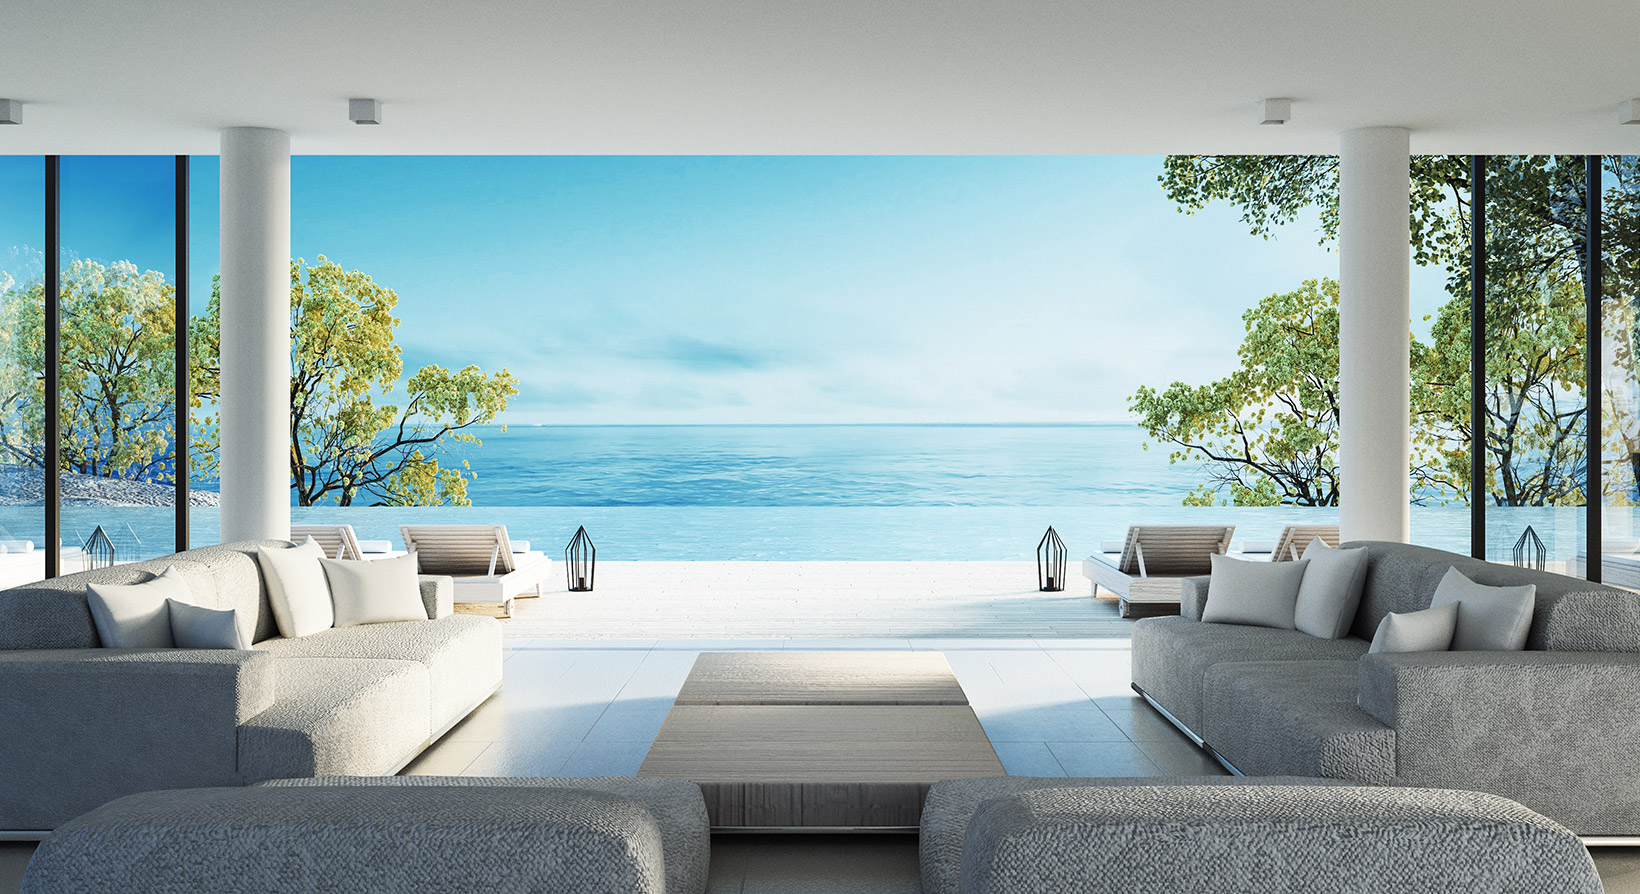 3D Rendering of a decorated interior with a beach view